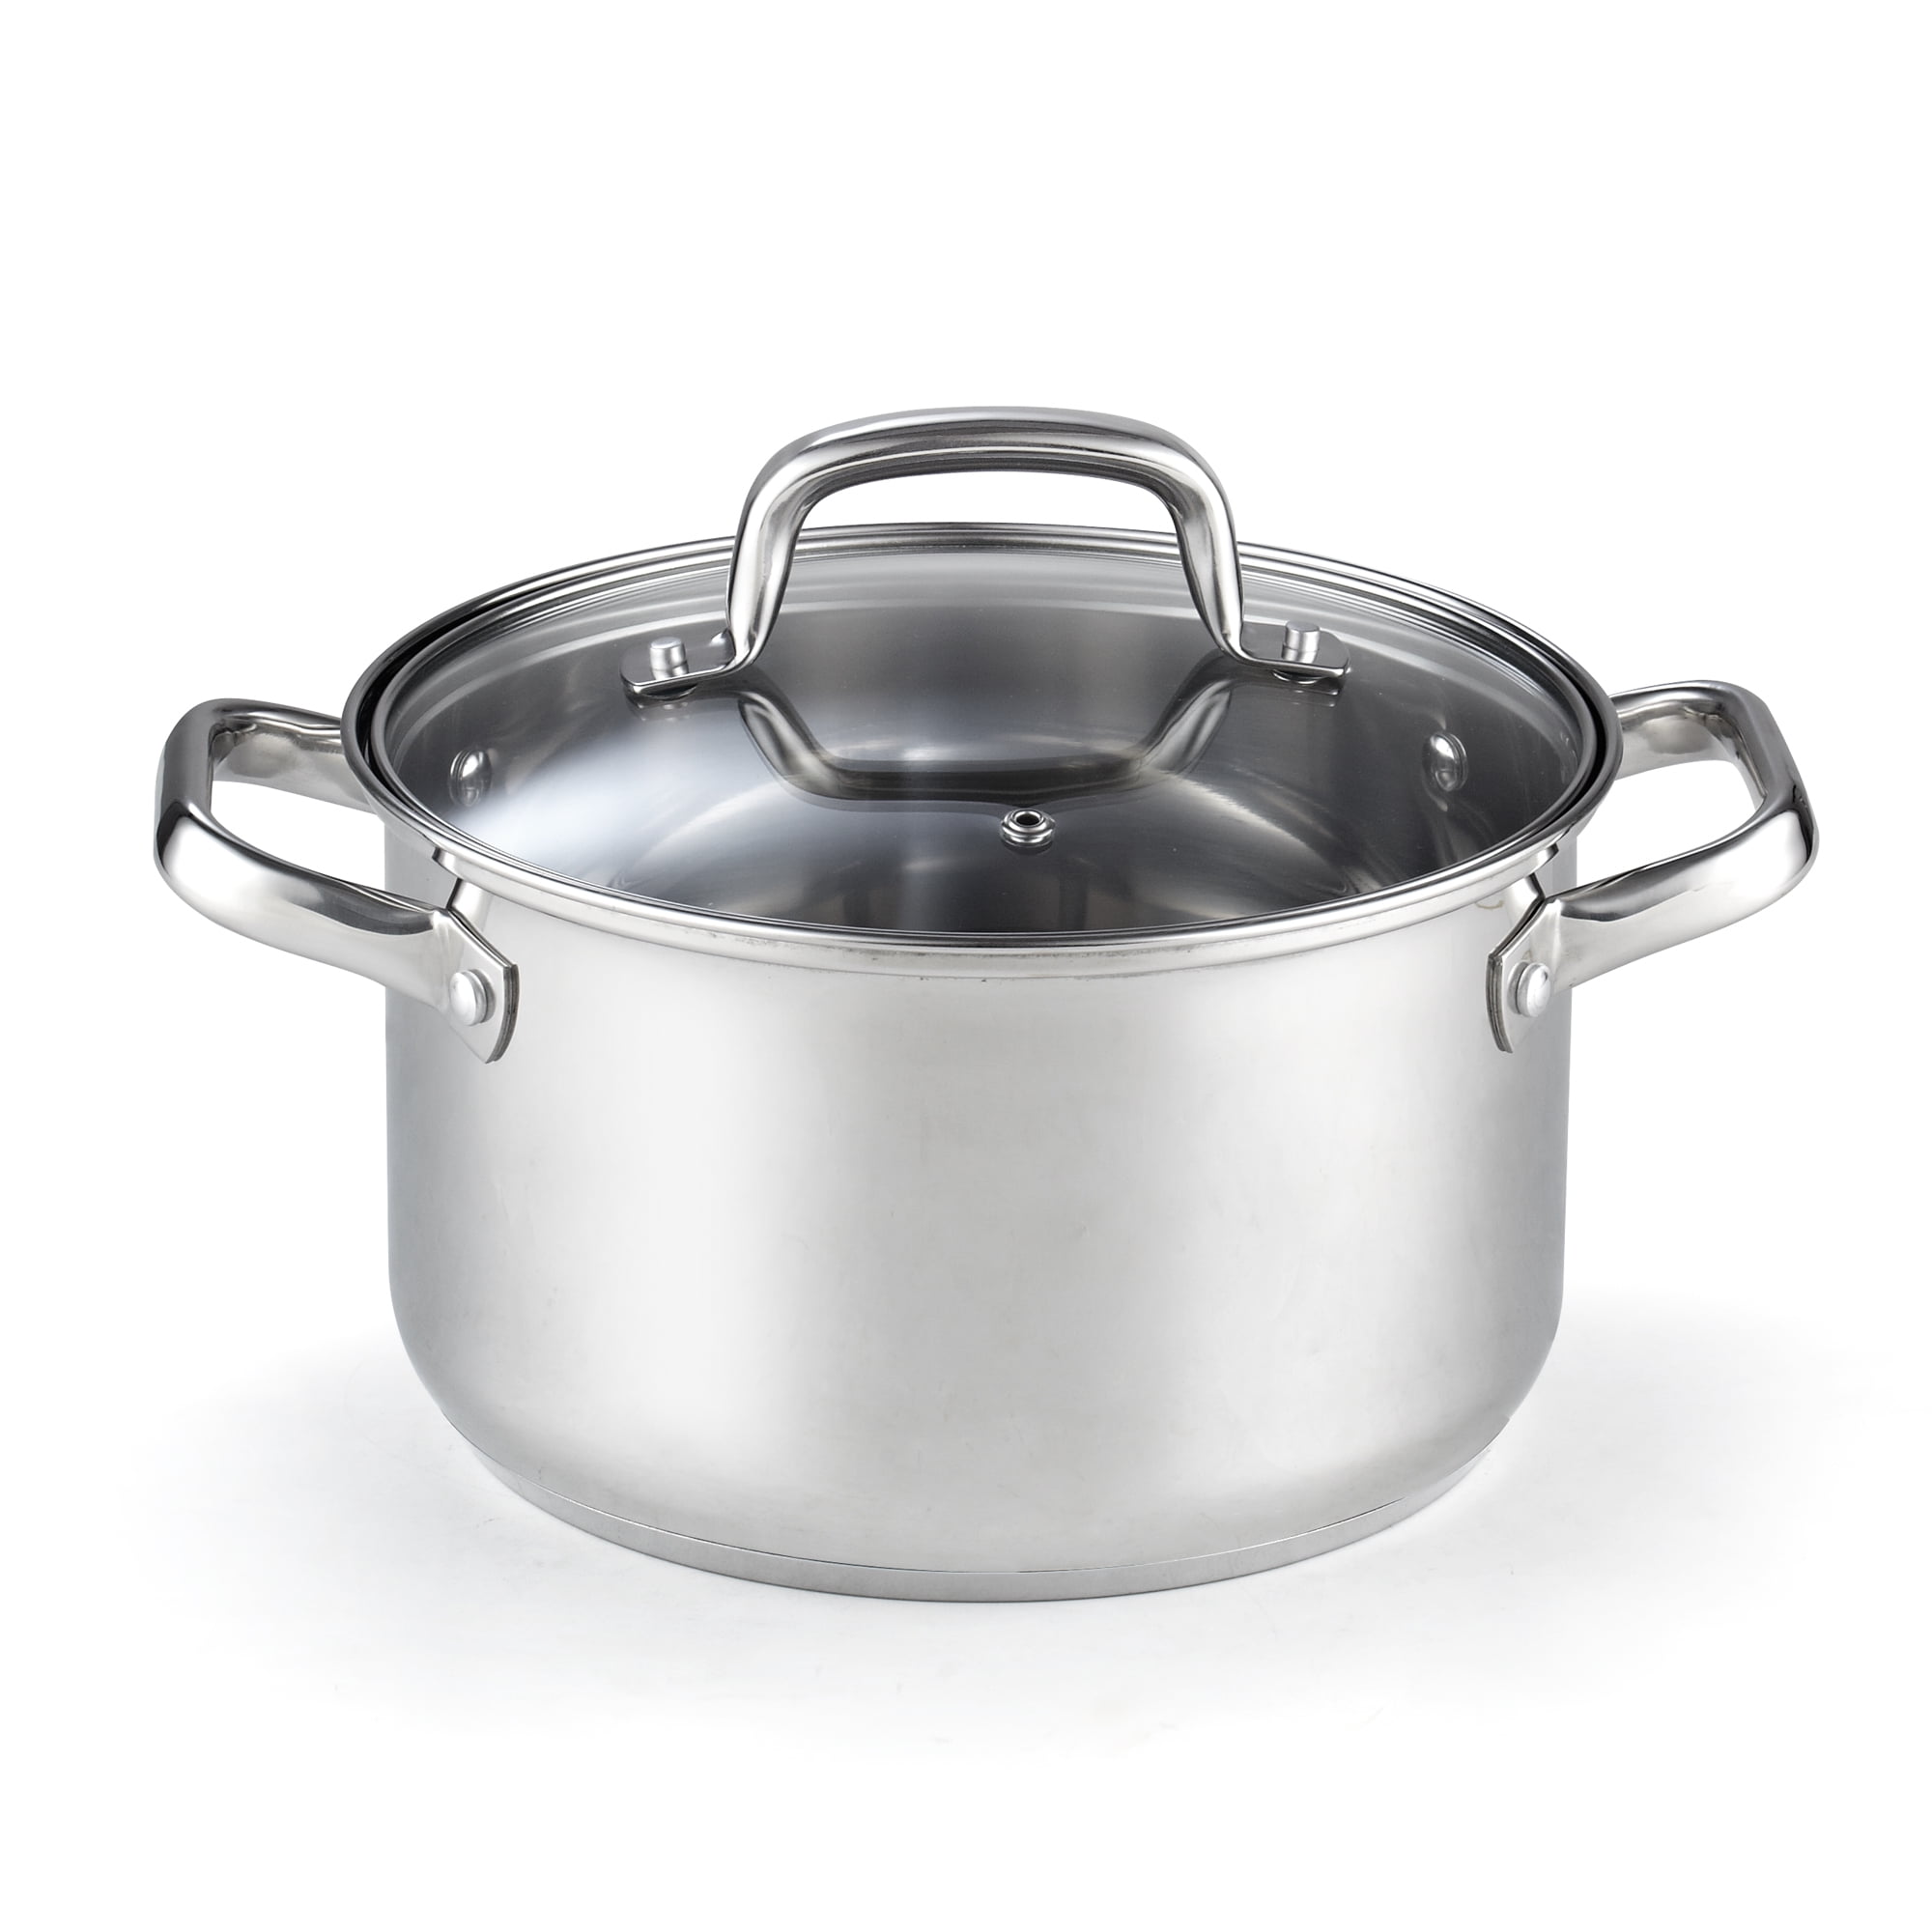 Nonstick Bl... 1 Bialetti 07265 Oval 5 Quart Pasta Pot with with Strainer Lid 